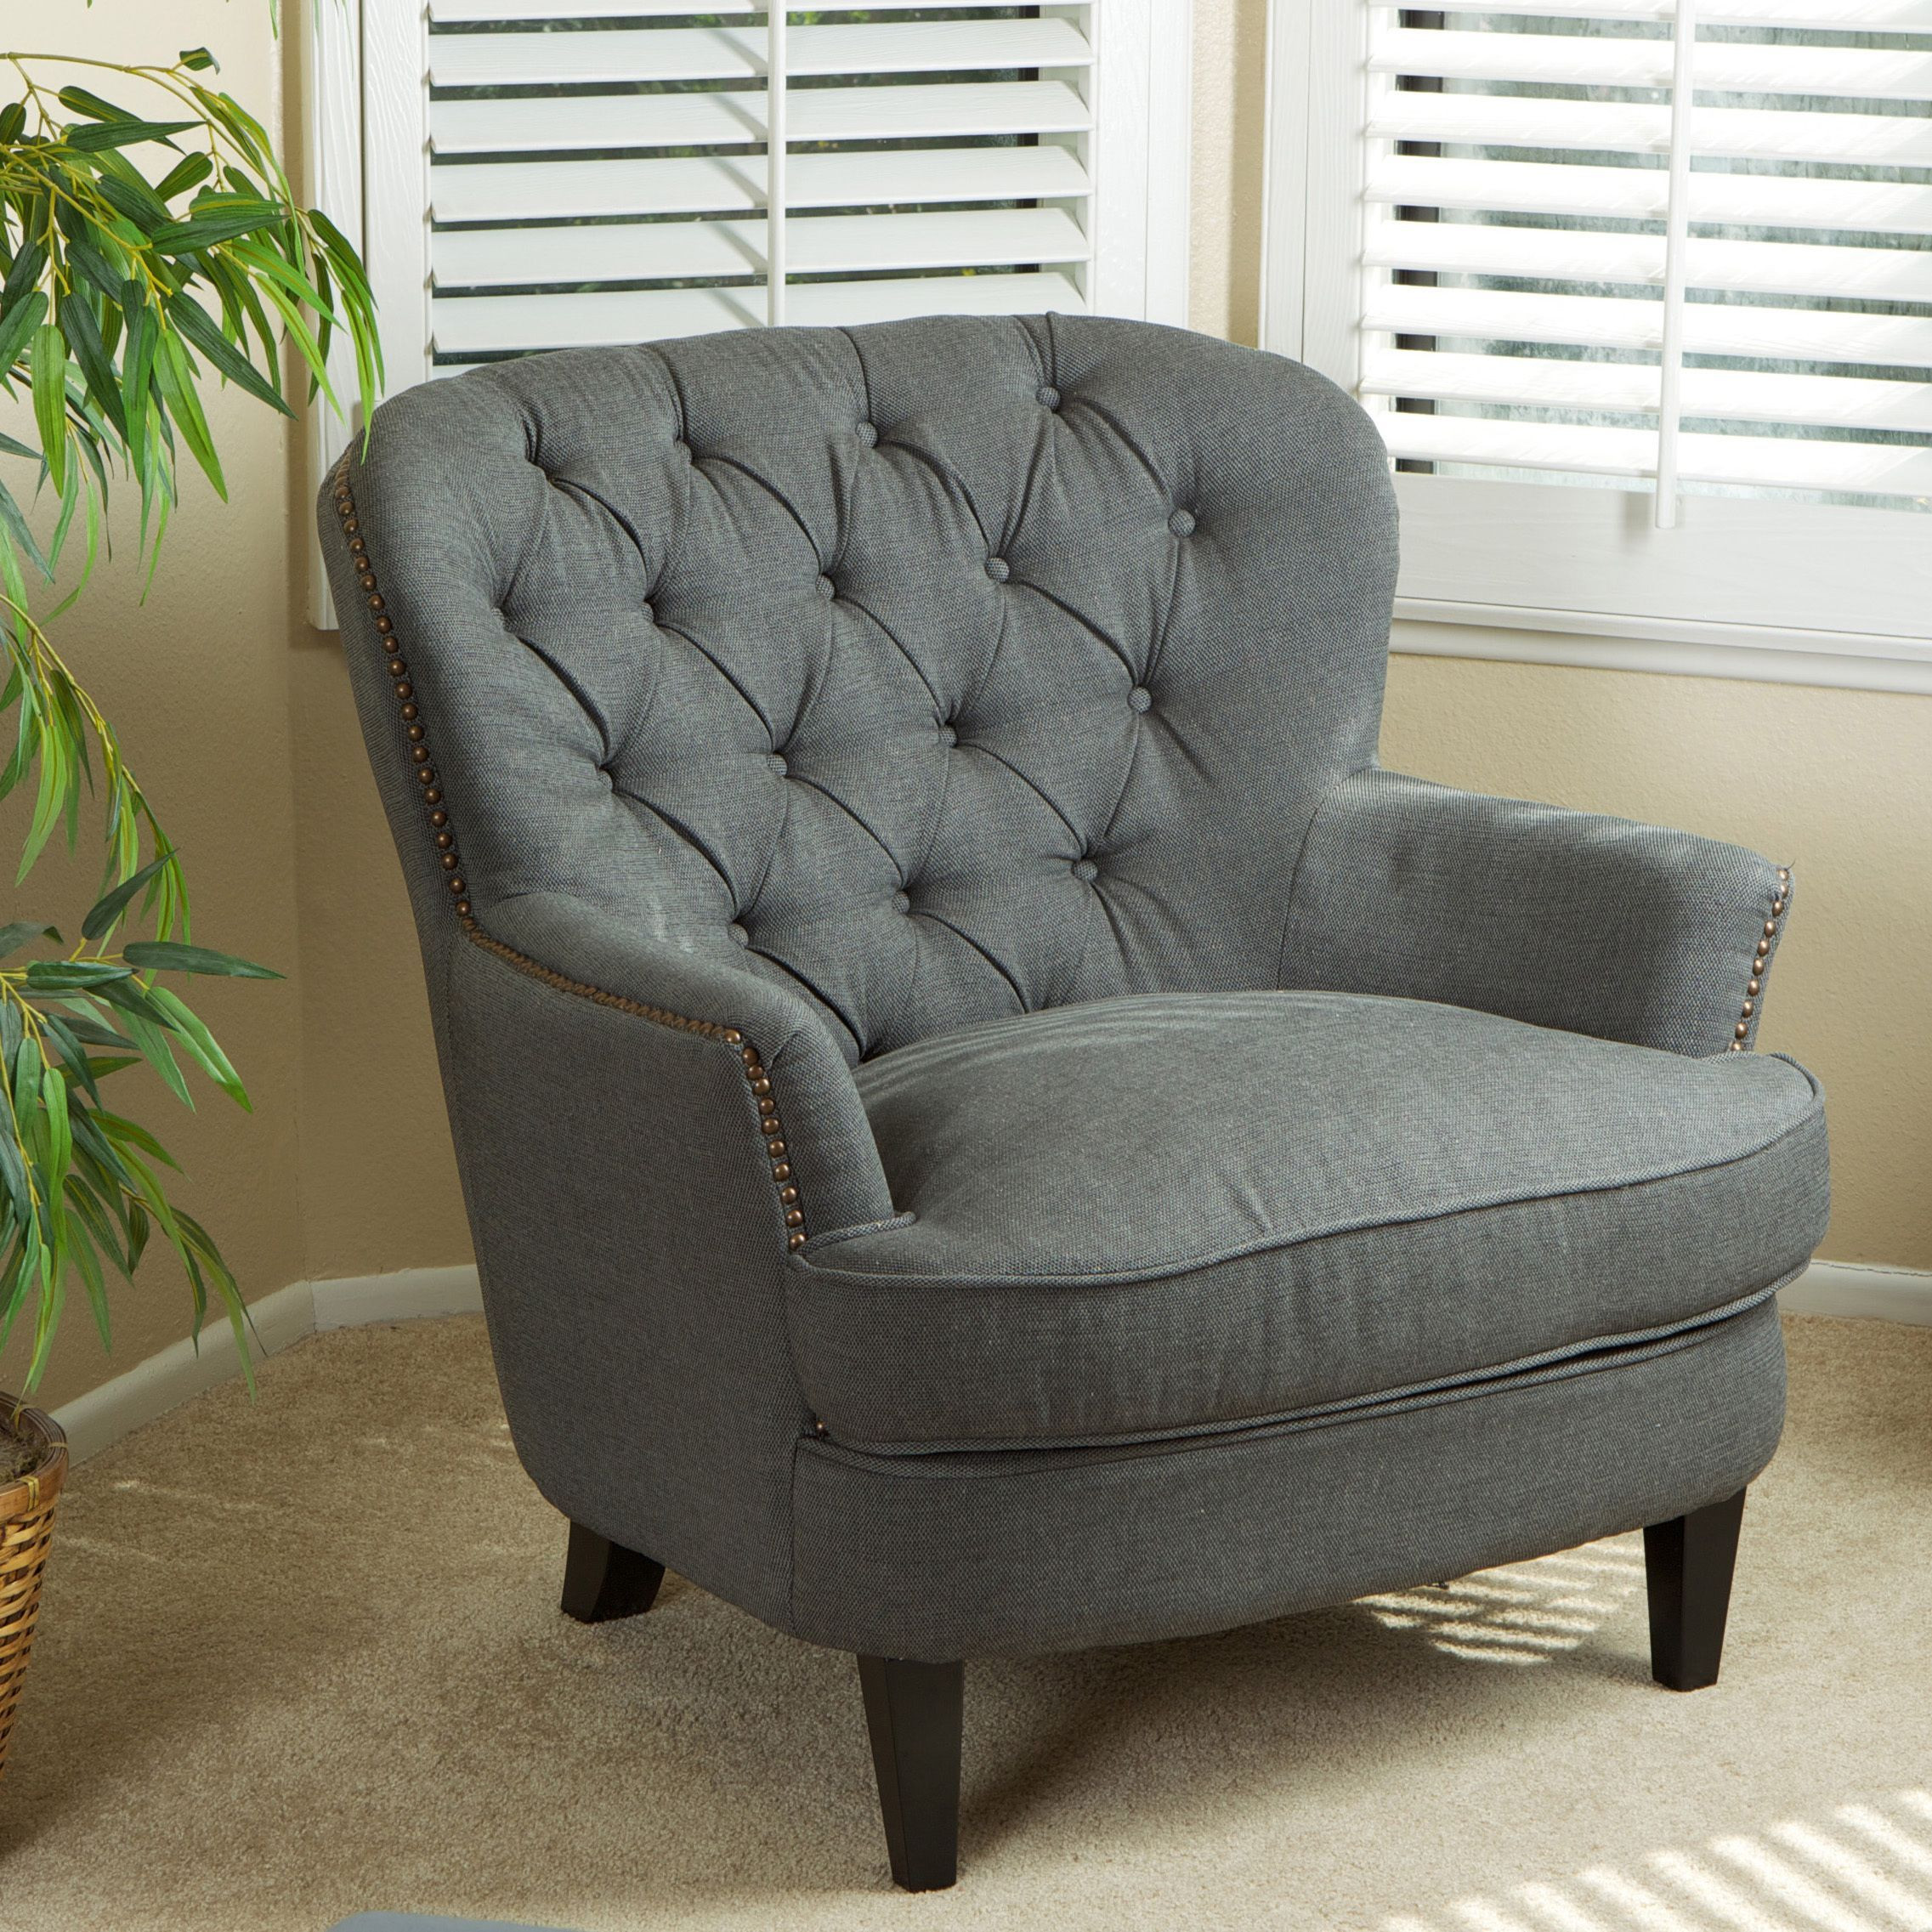 Overstock Living Room Chairs
 Overstock line Shopping Bedding Furniture